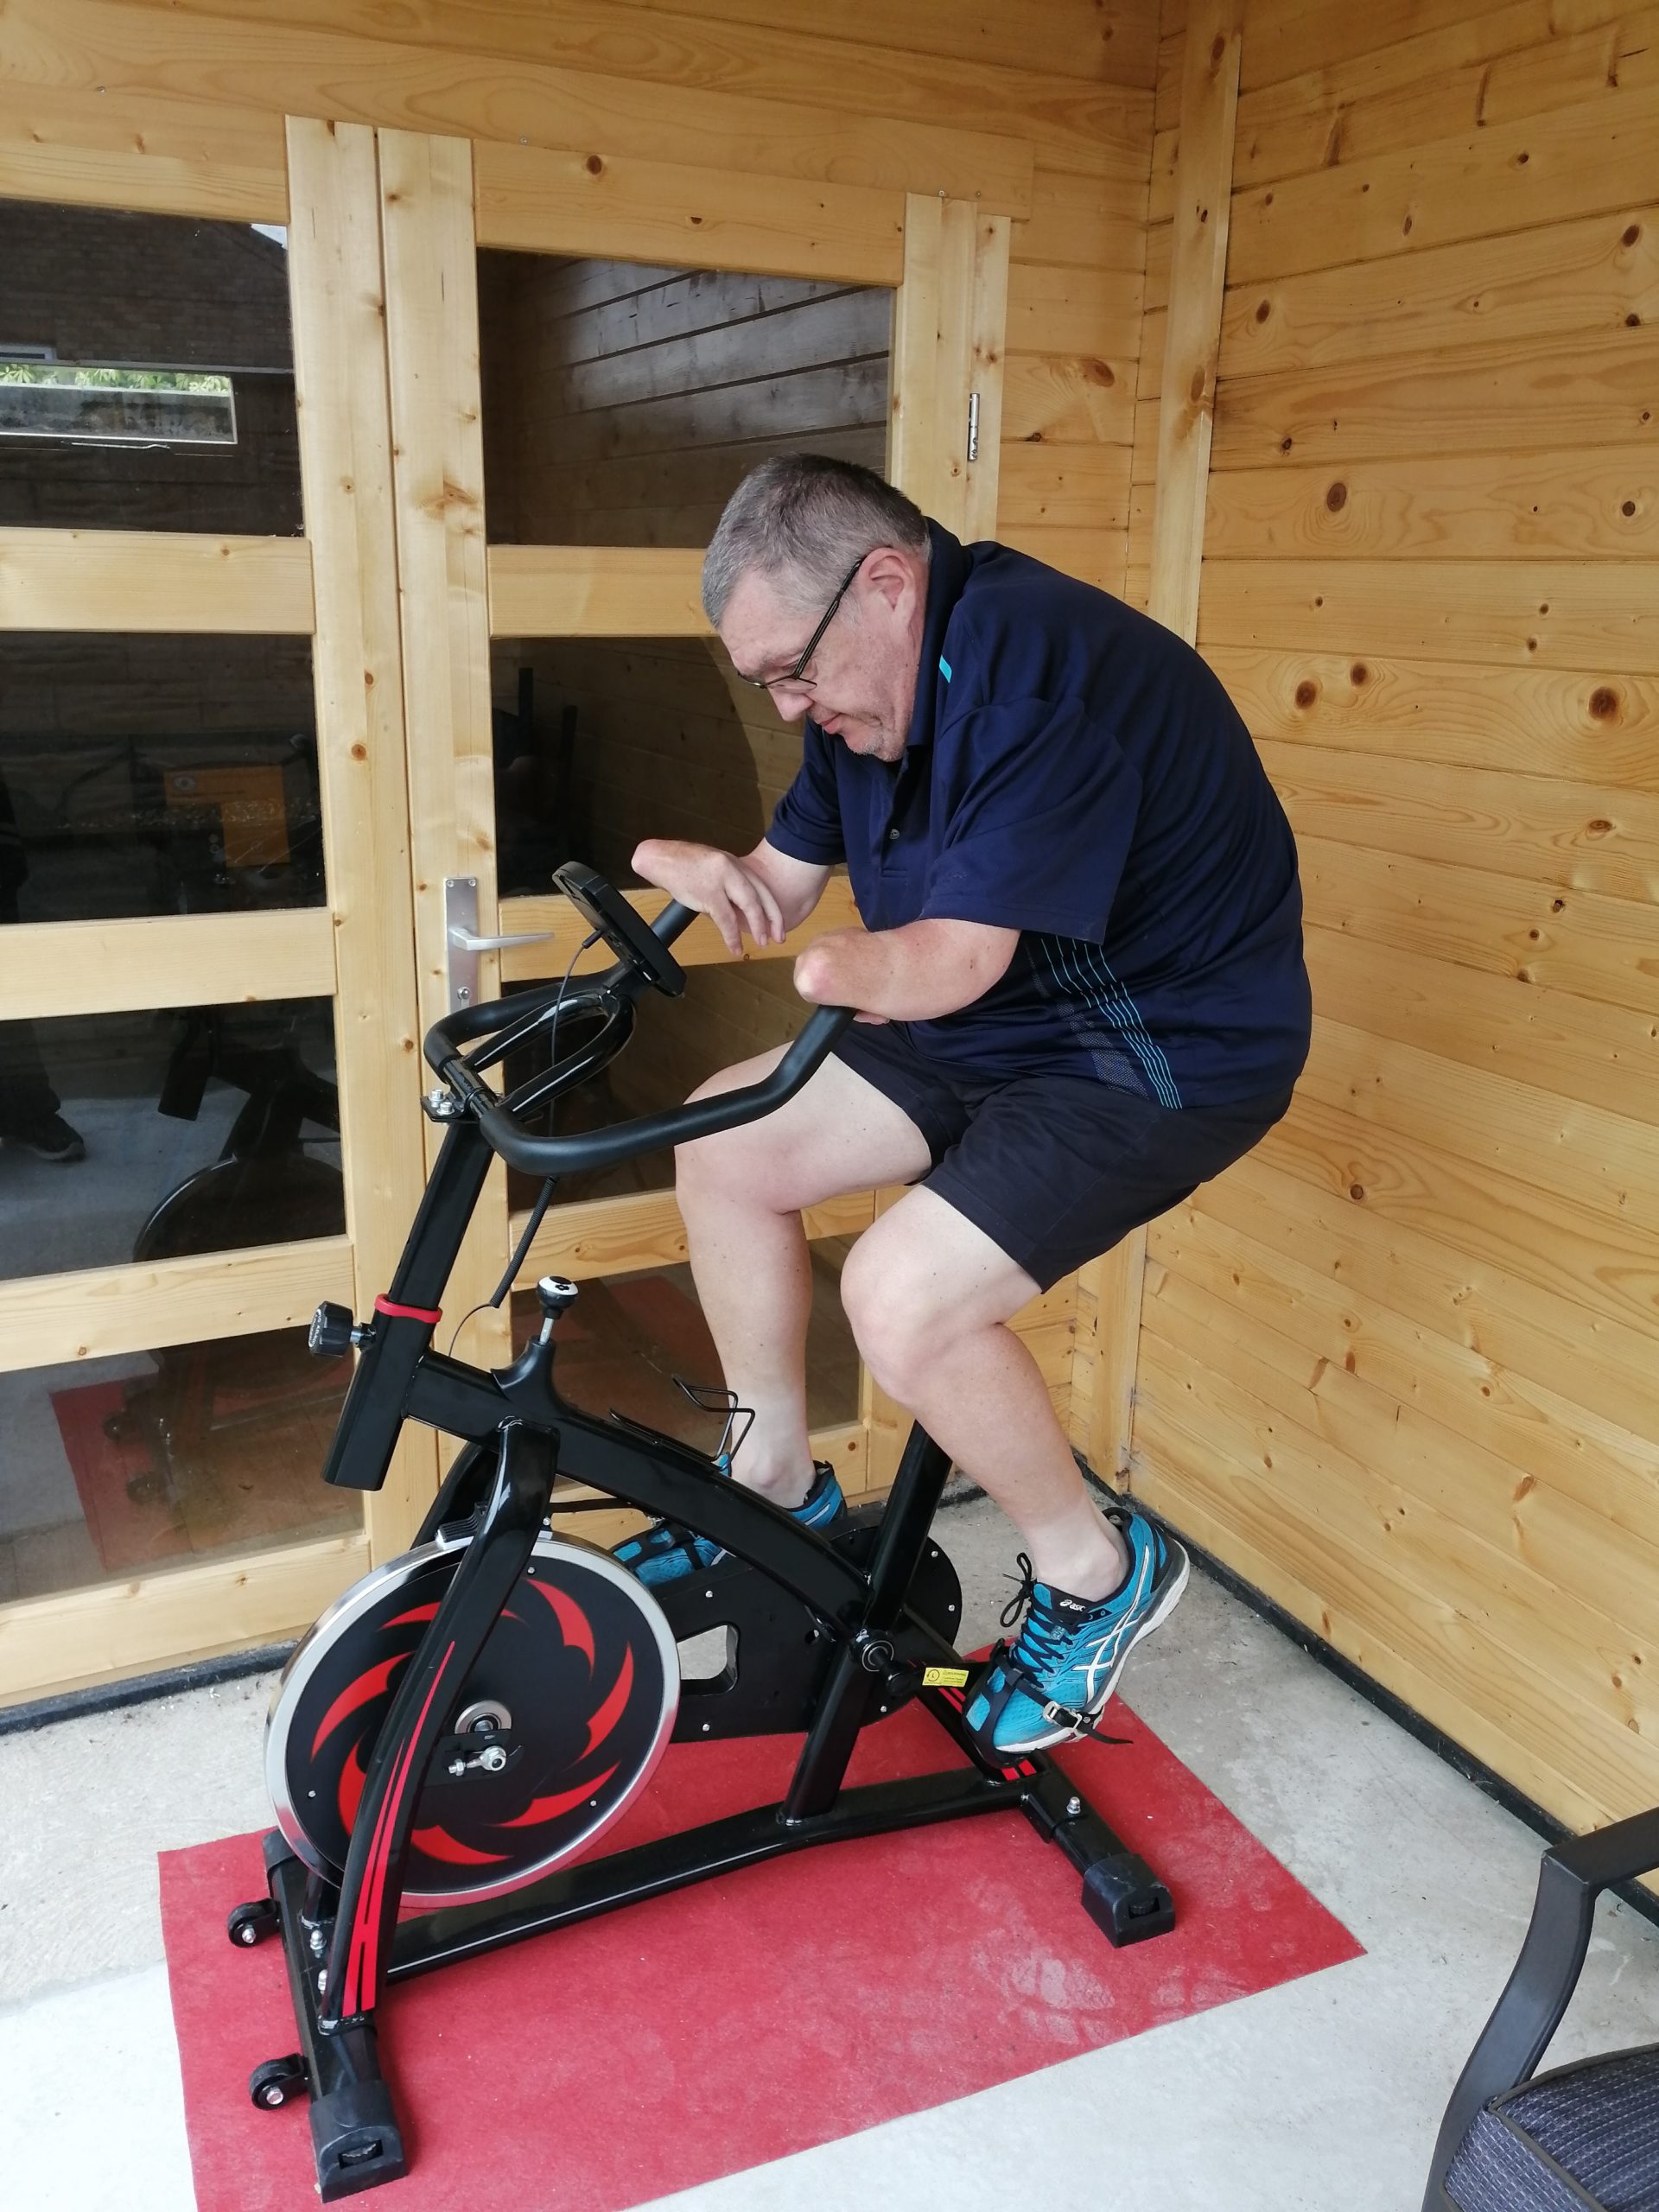 Neal Merry on his exercise bike which has handle bars pointing back towards the seat with upward angled ends his to suit his arms